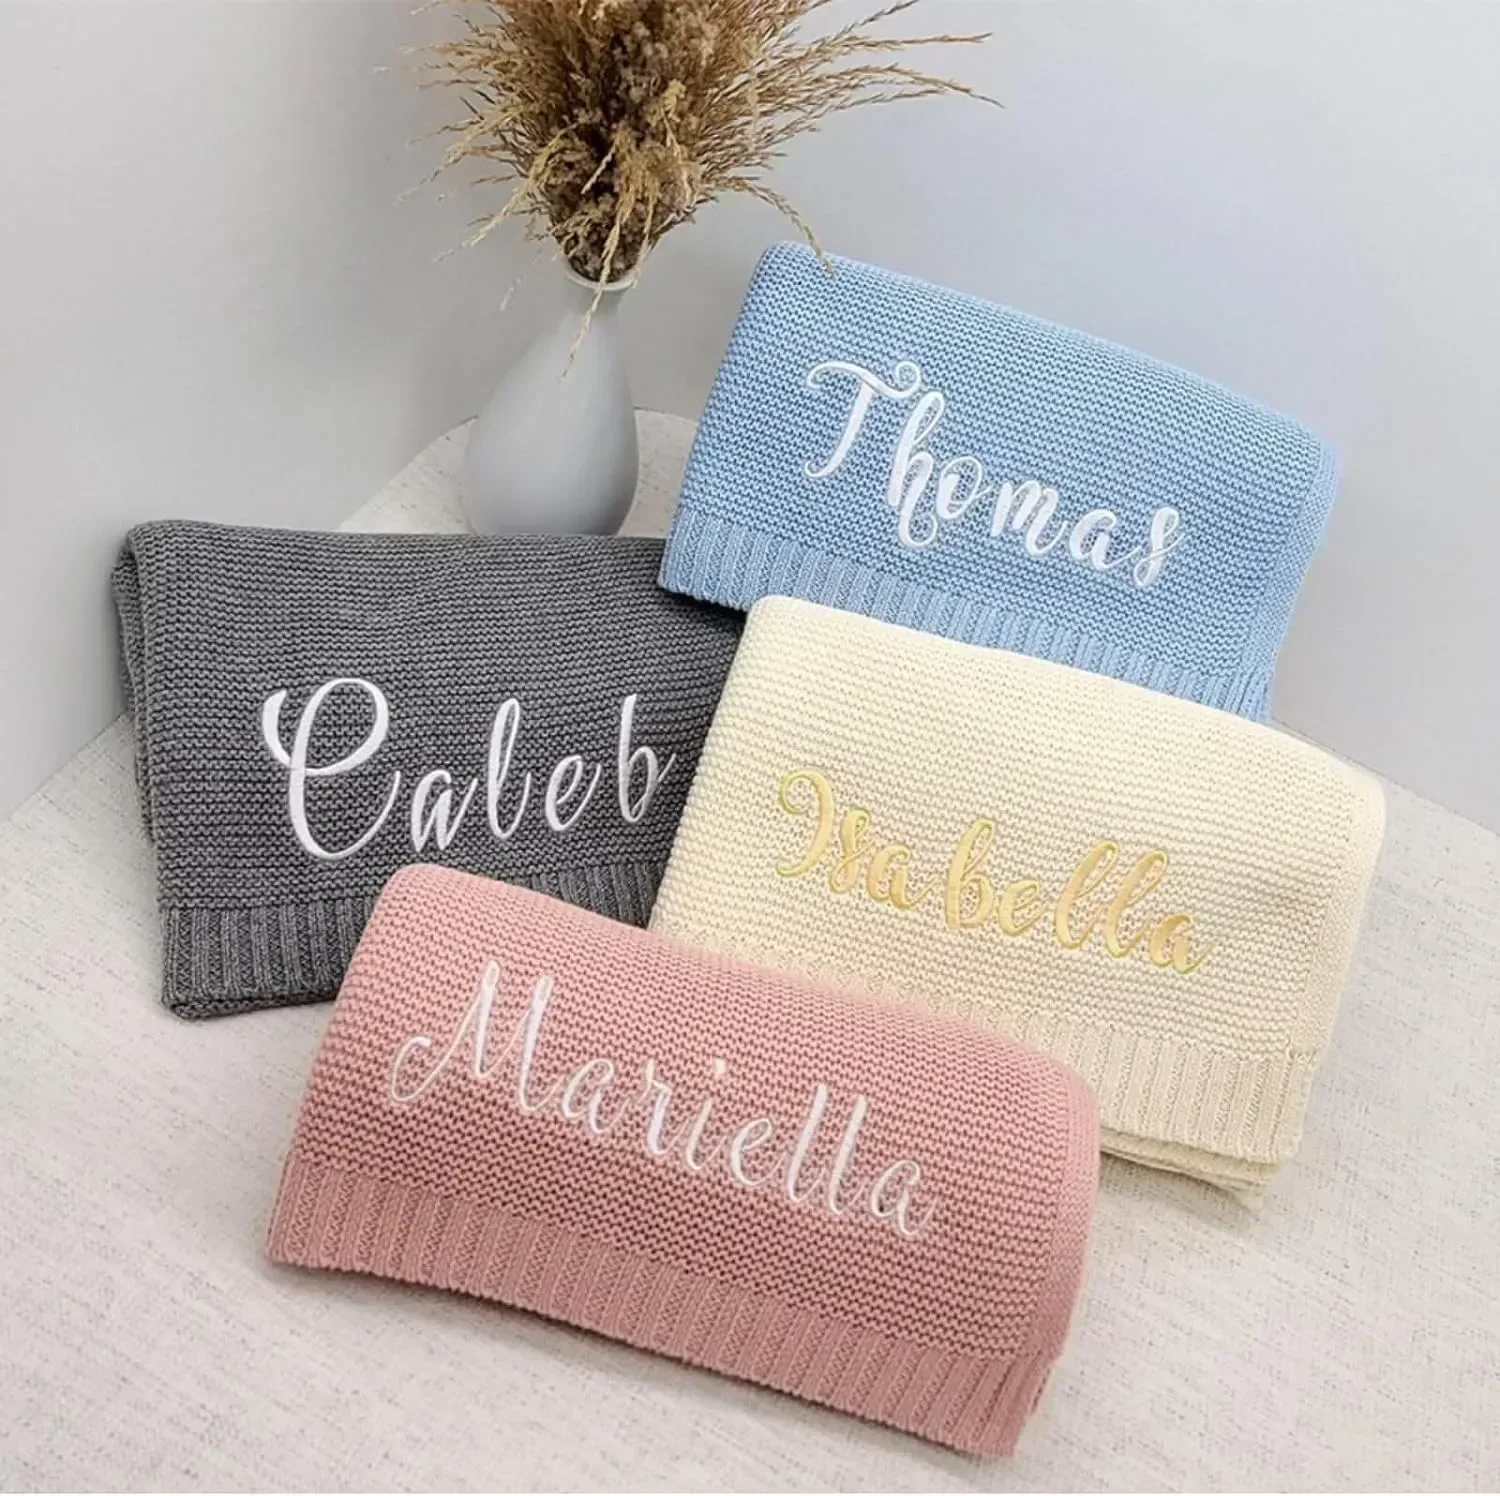 Embroidered Name Cotton Knitted Newborn Blanket Personalized Baby Boy Girl Blanket Baby Shower Gift Breathable Stroller Blanket